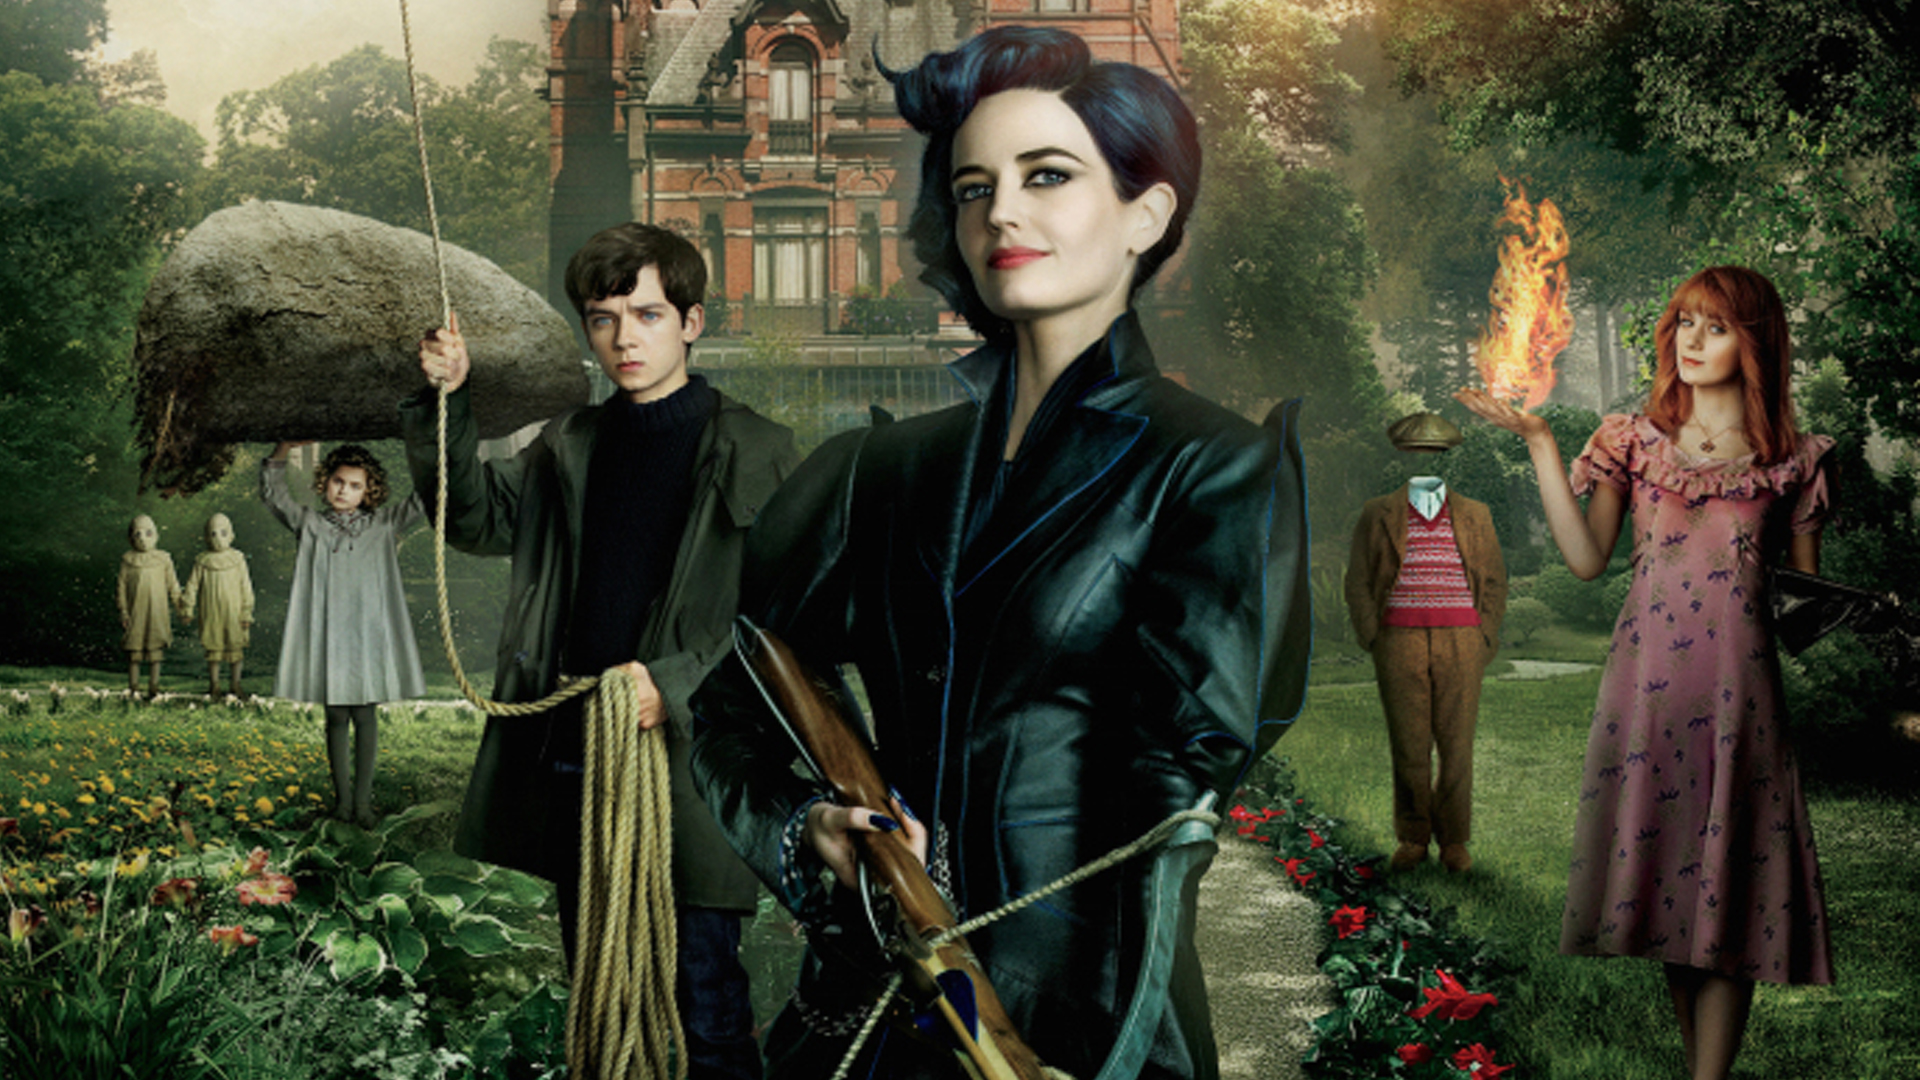 WATCH THE TRAILER OF TIM BURTON'S MISS PEREGRINE'S HOME FOR PECULIAR CHILDREN